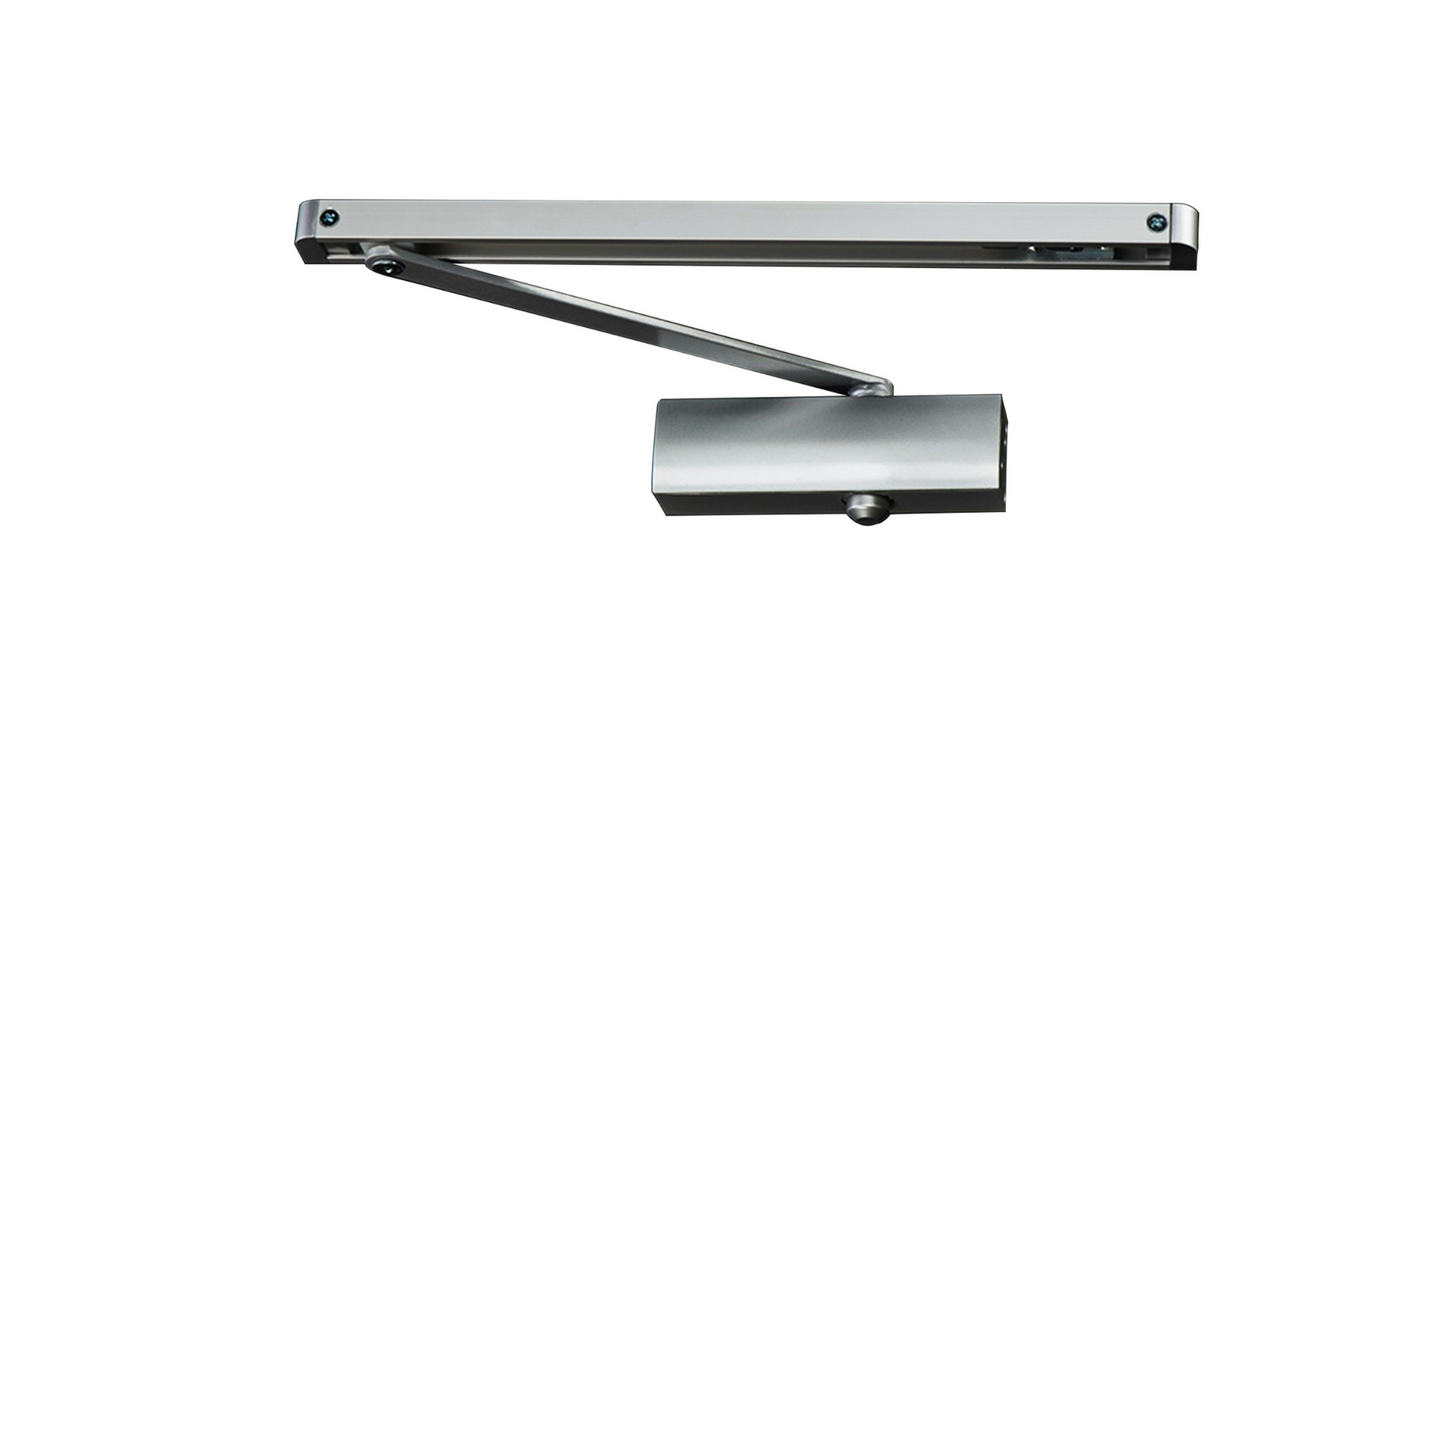 PALMAT Automatic Adjustable Hydraulic Door Closer with Slide Track Arm and Iron Cover for Heavy Duty